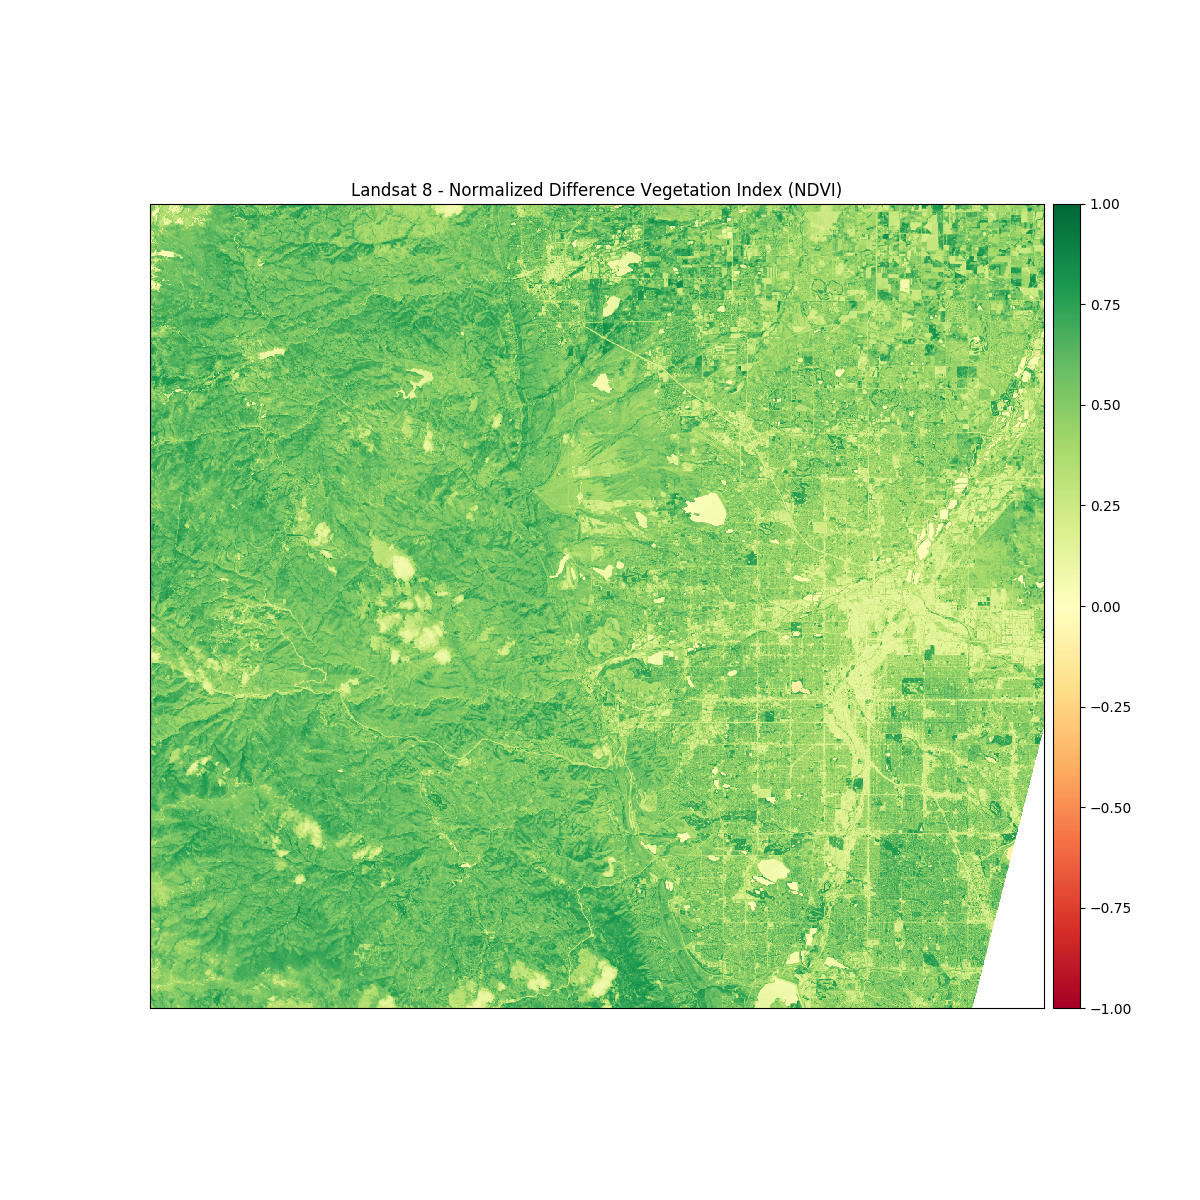 ../_images/sphx_glr_plot_calculate_classify_ndvi_001.png